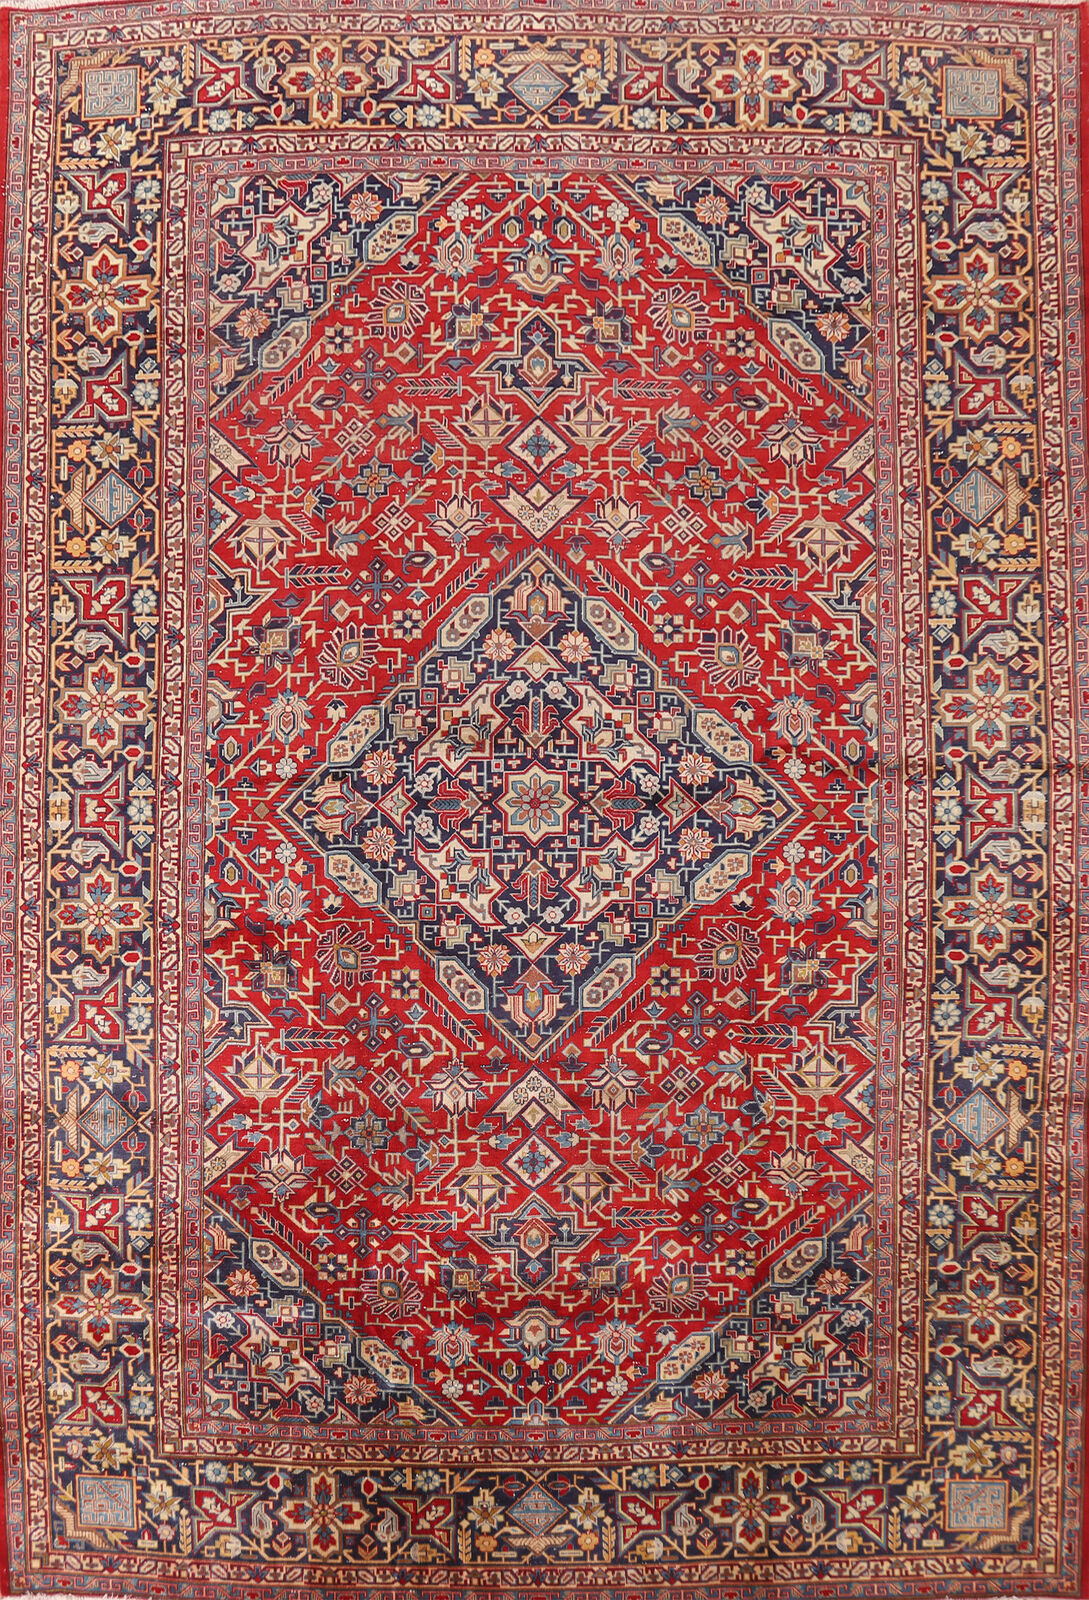 Vintage Wool Kashaan Traditional Hand-knotted Red Living Room Area Rug 10x14